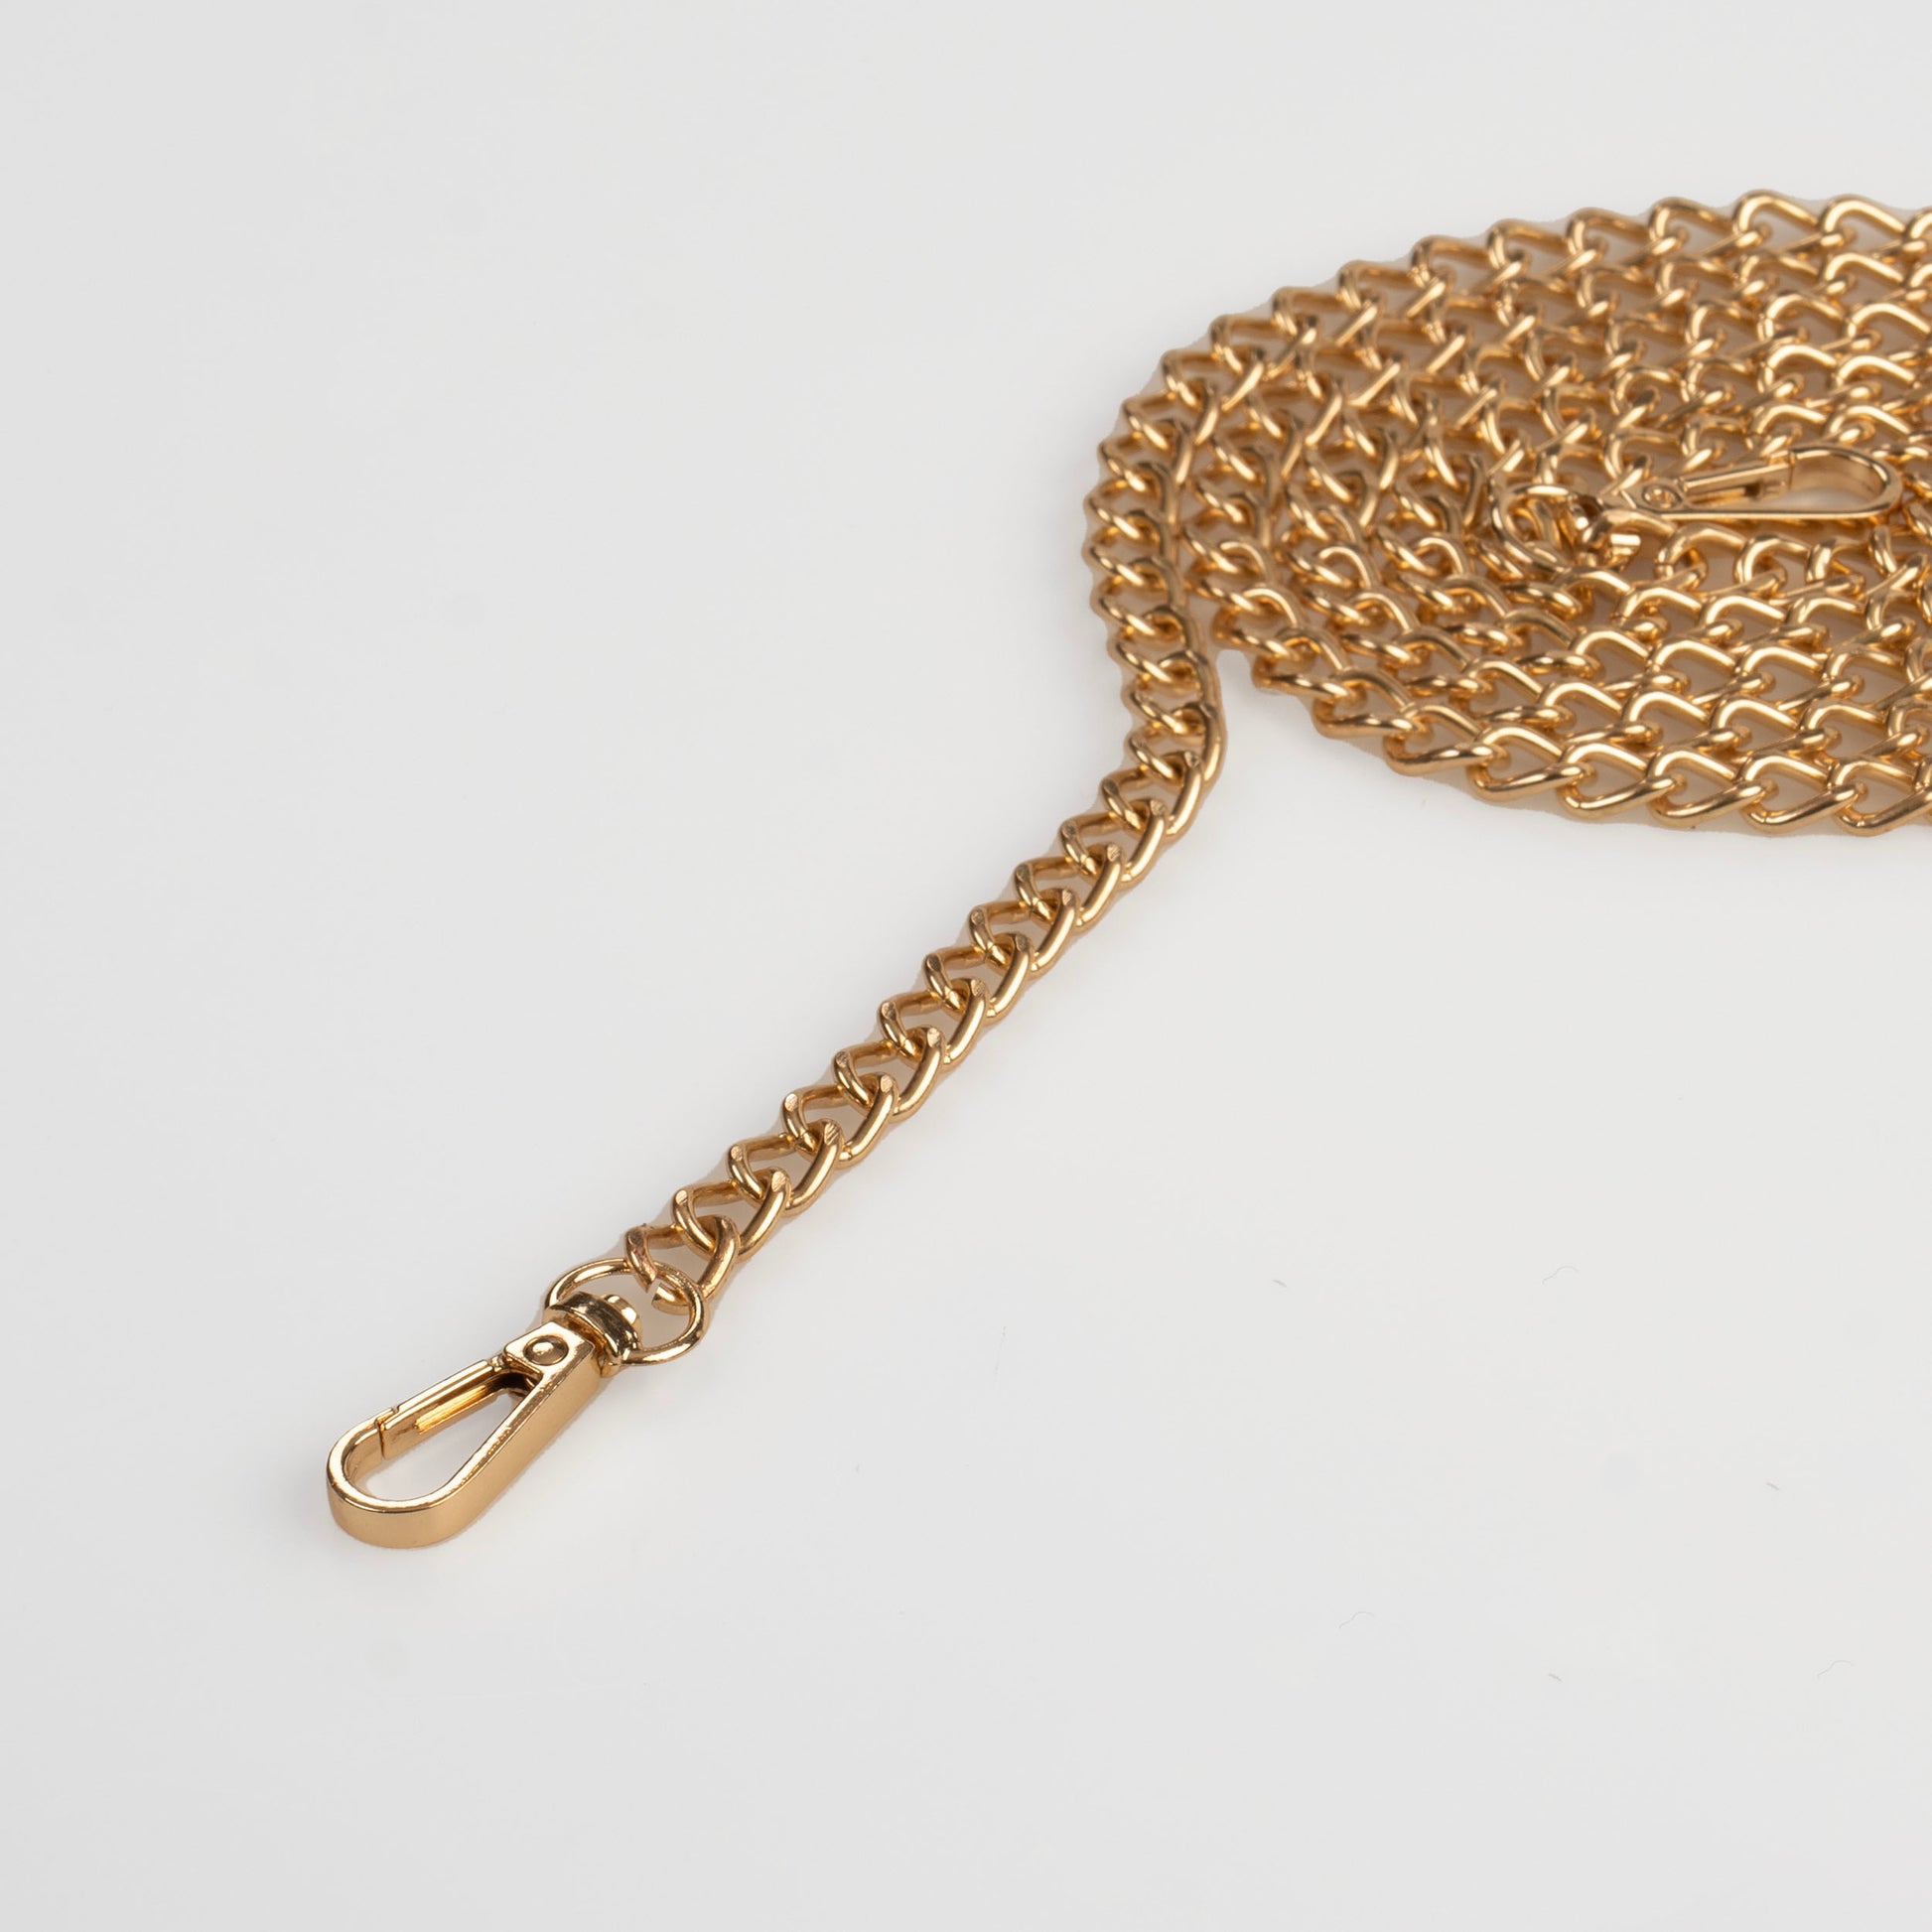 Gold Cable Chain Bag Strap by Swoon London